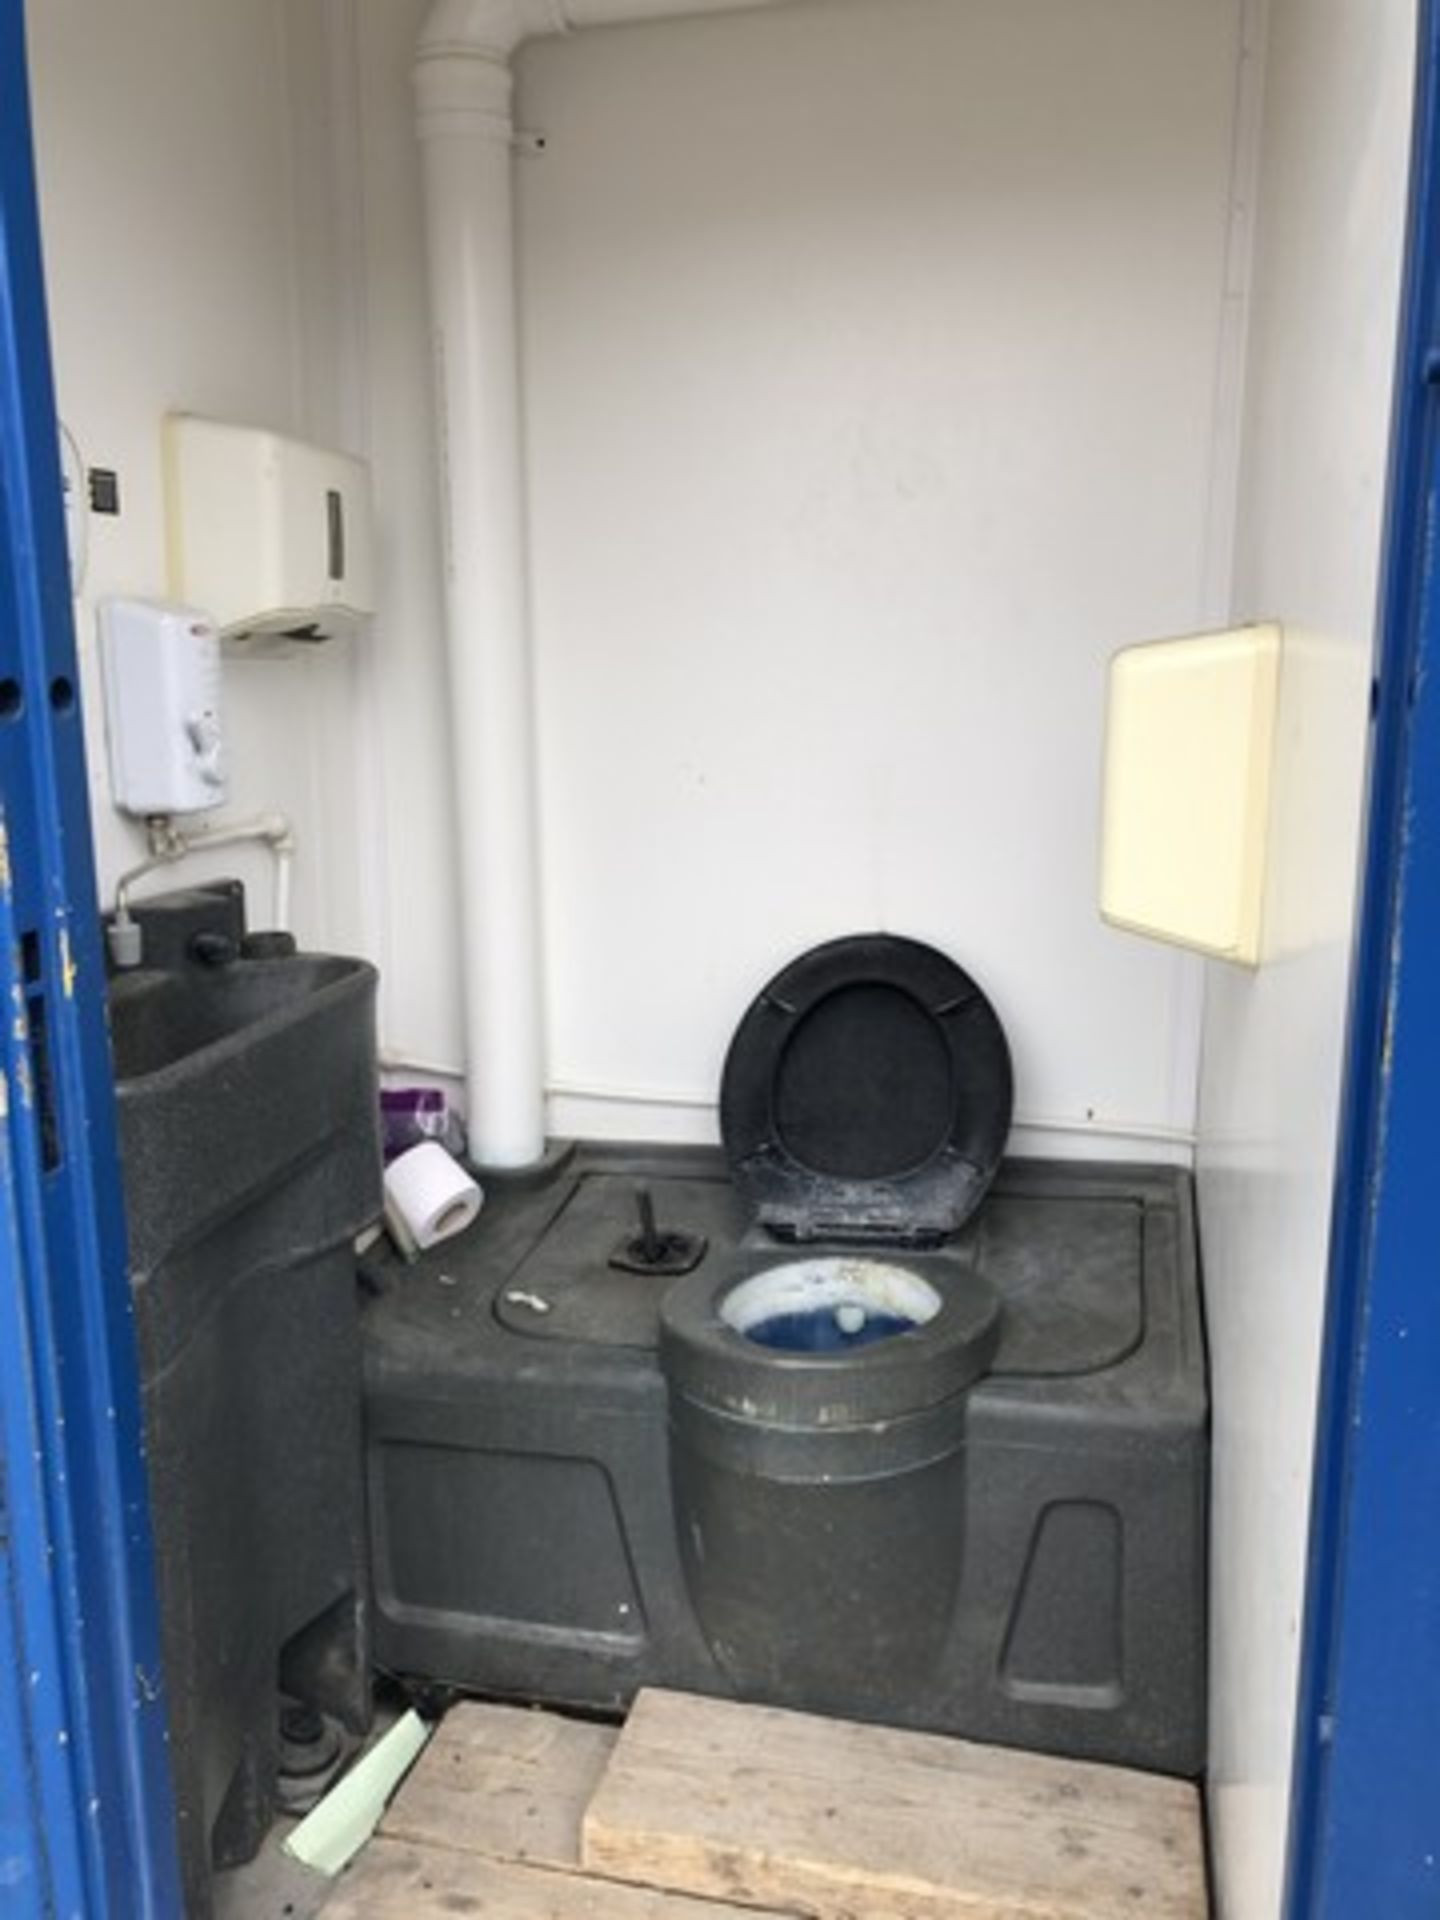 ANTI VANDAL WELFARE UNIT 20FT X8FT C/W CANTEEN, SEATING FOR 6, SMALL DRYING ROOM, CHEMICAL TOILET AN - Image 5 of 7